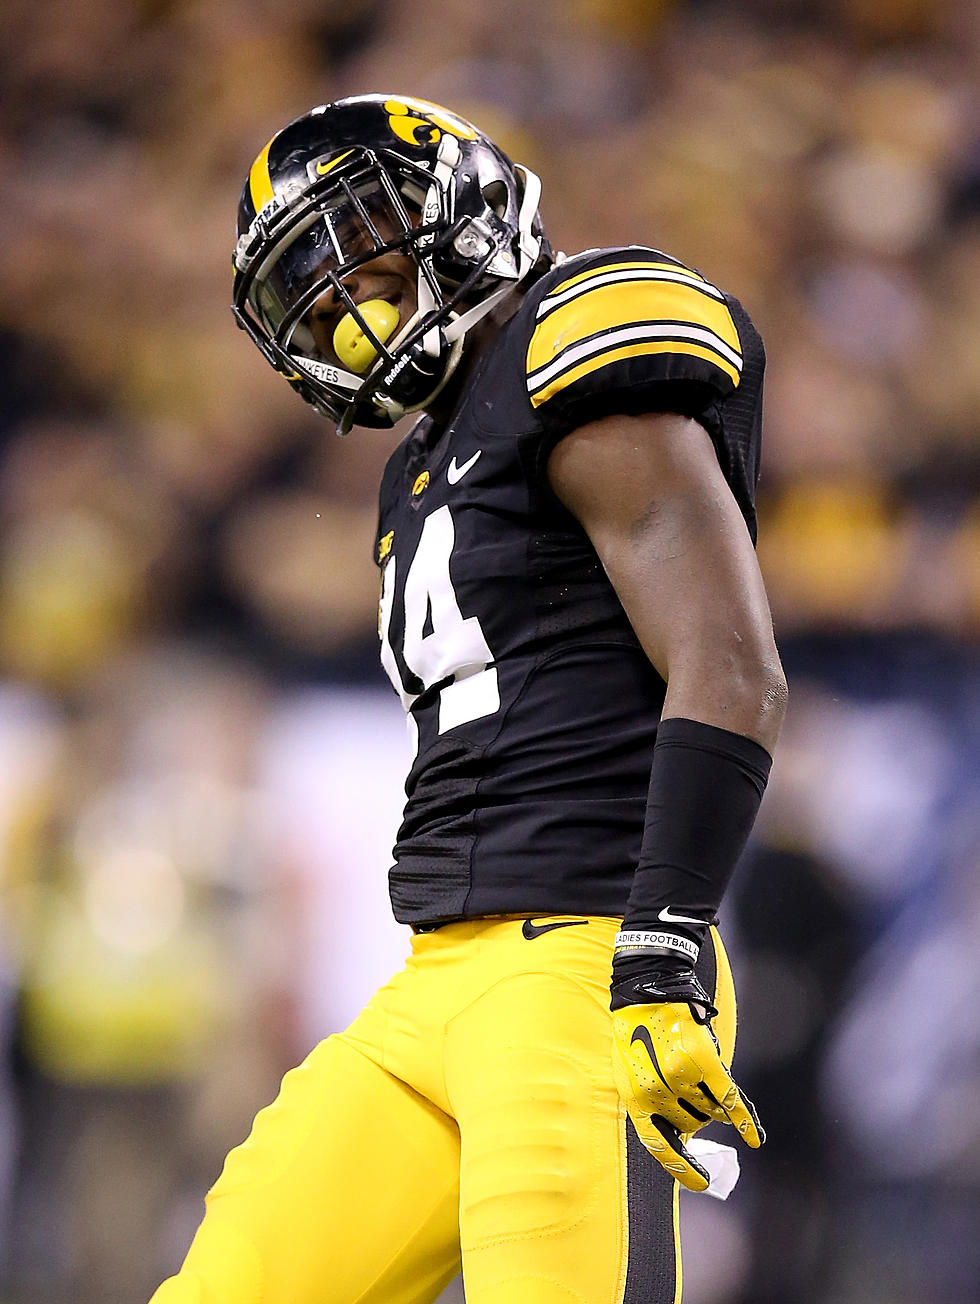 Desmond King Announces He’s Staying at Iowa